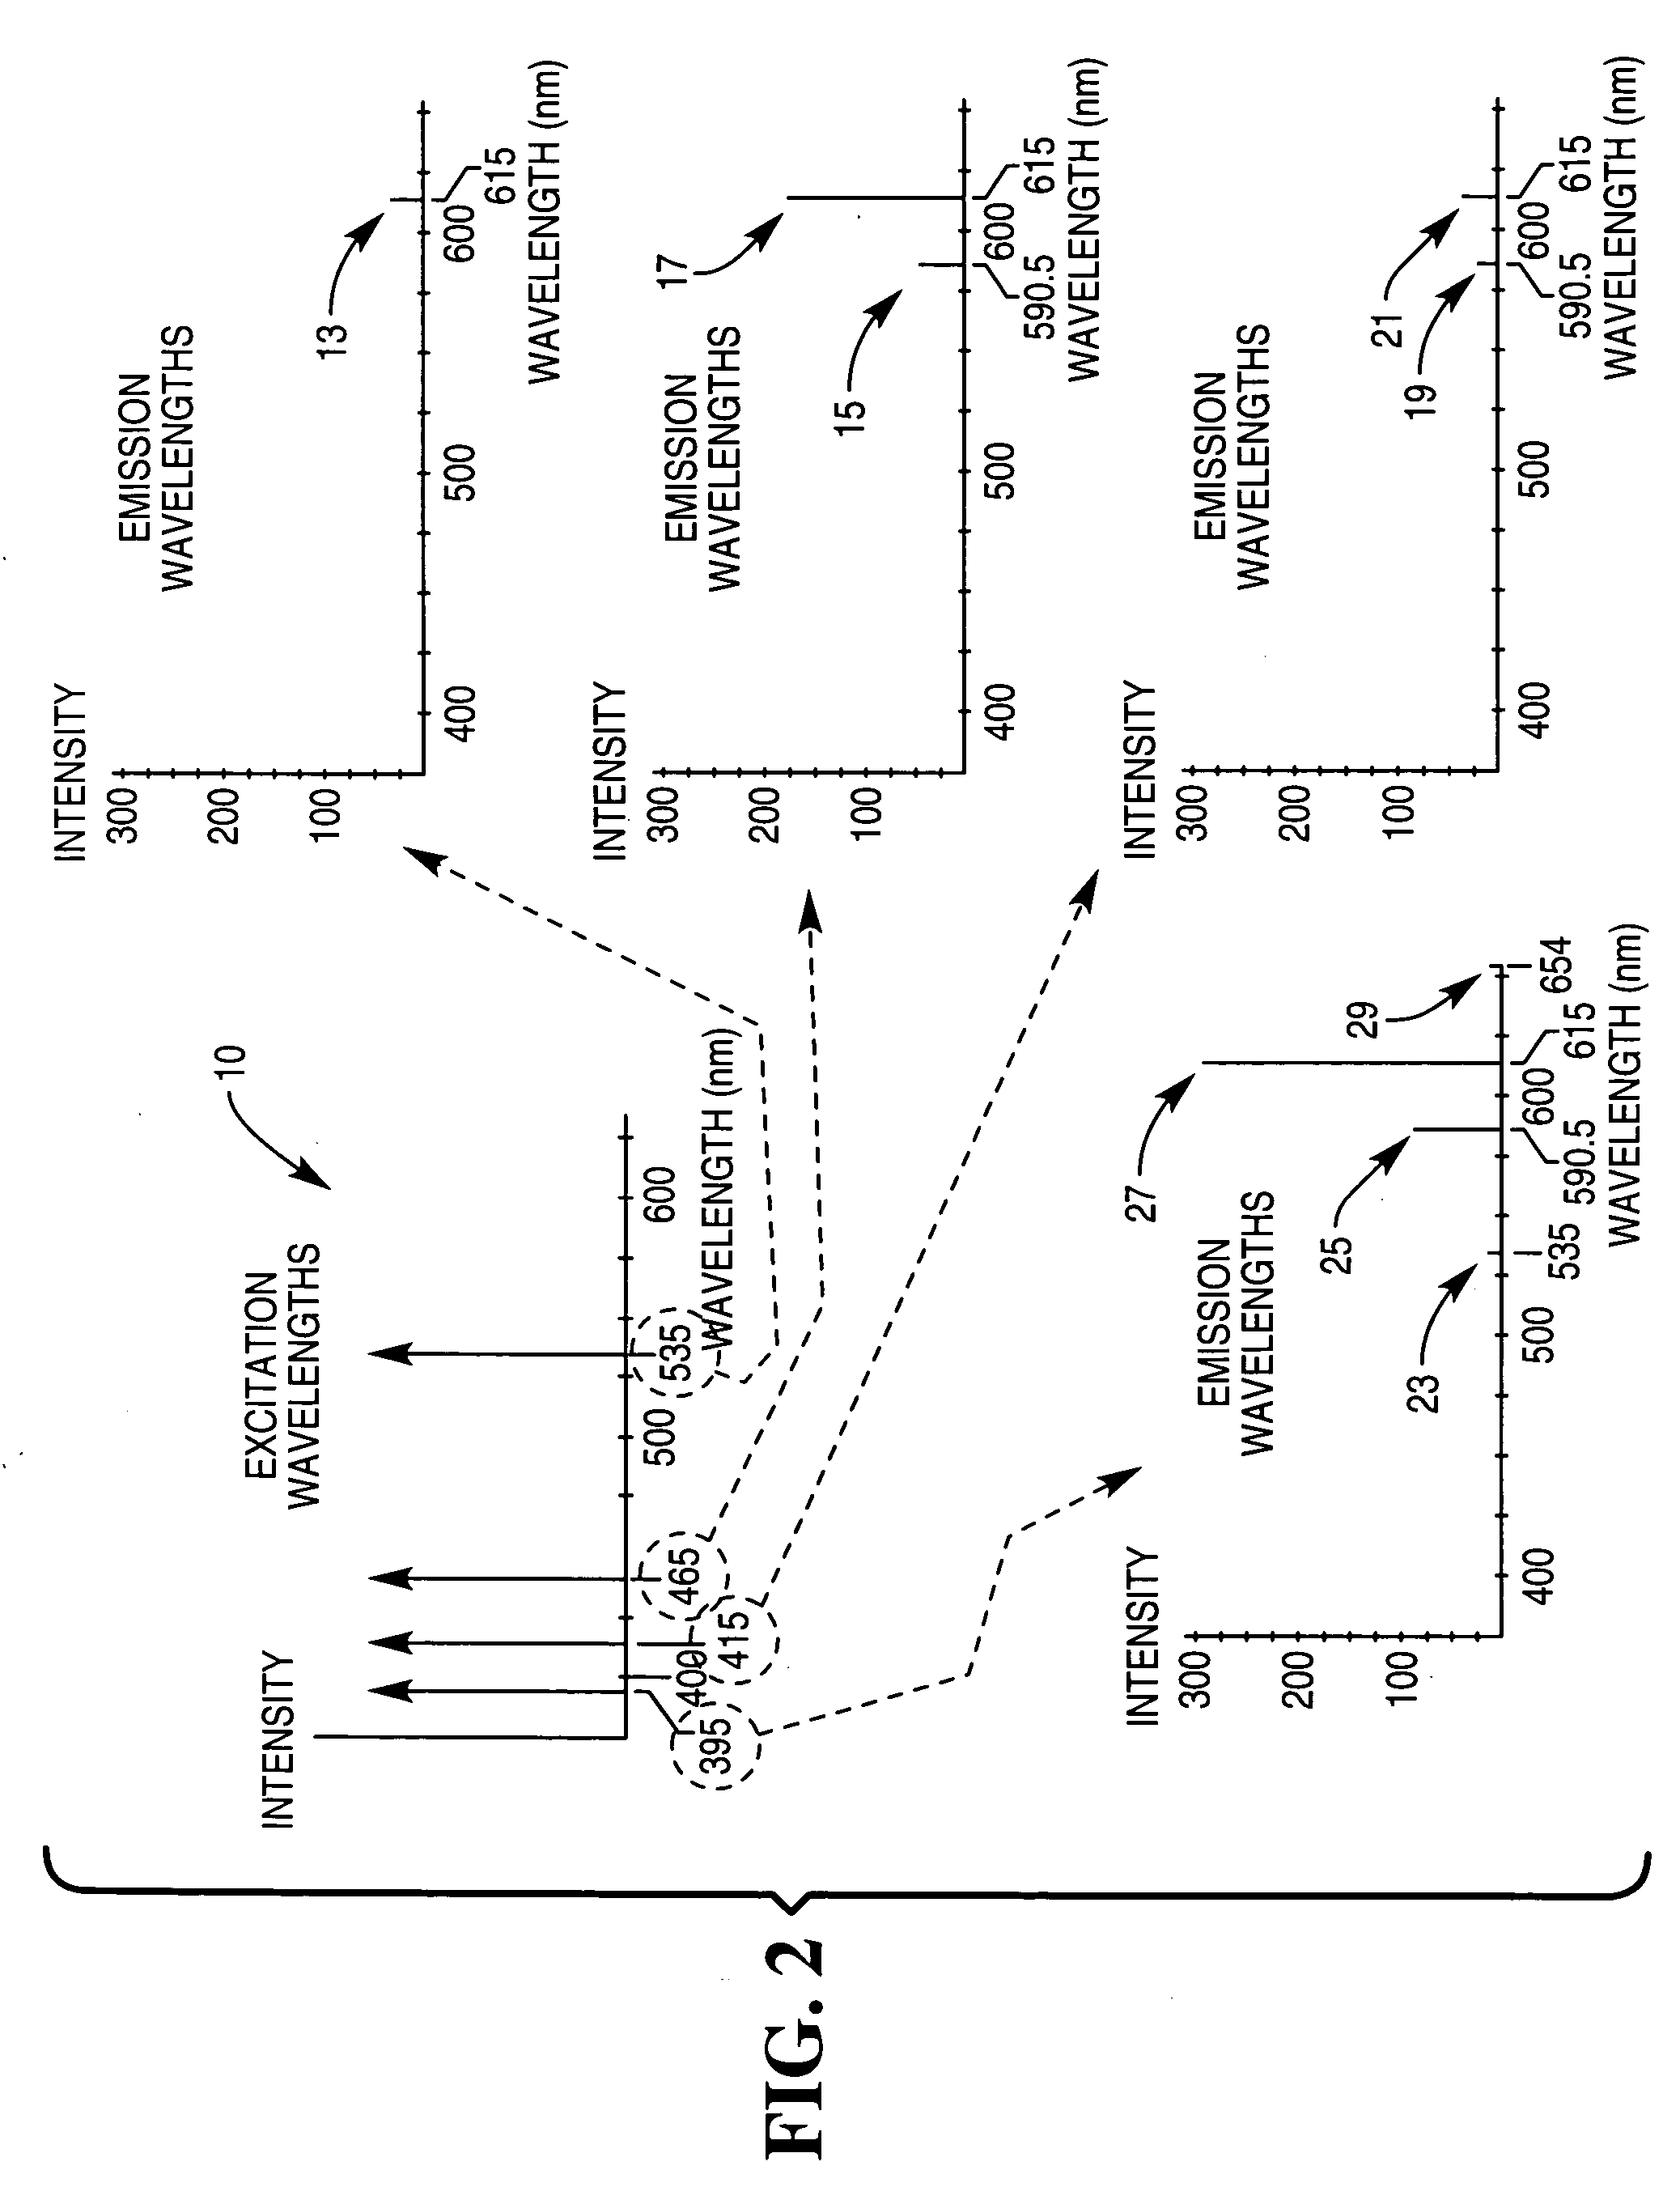 Security markers for determining composition of a medium